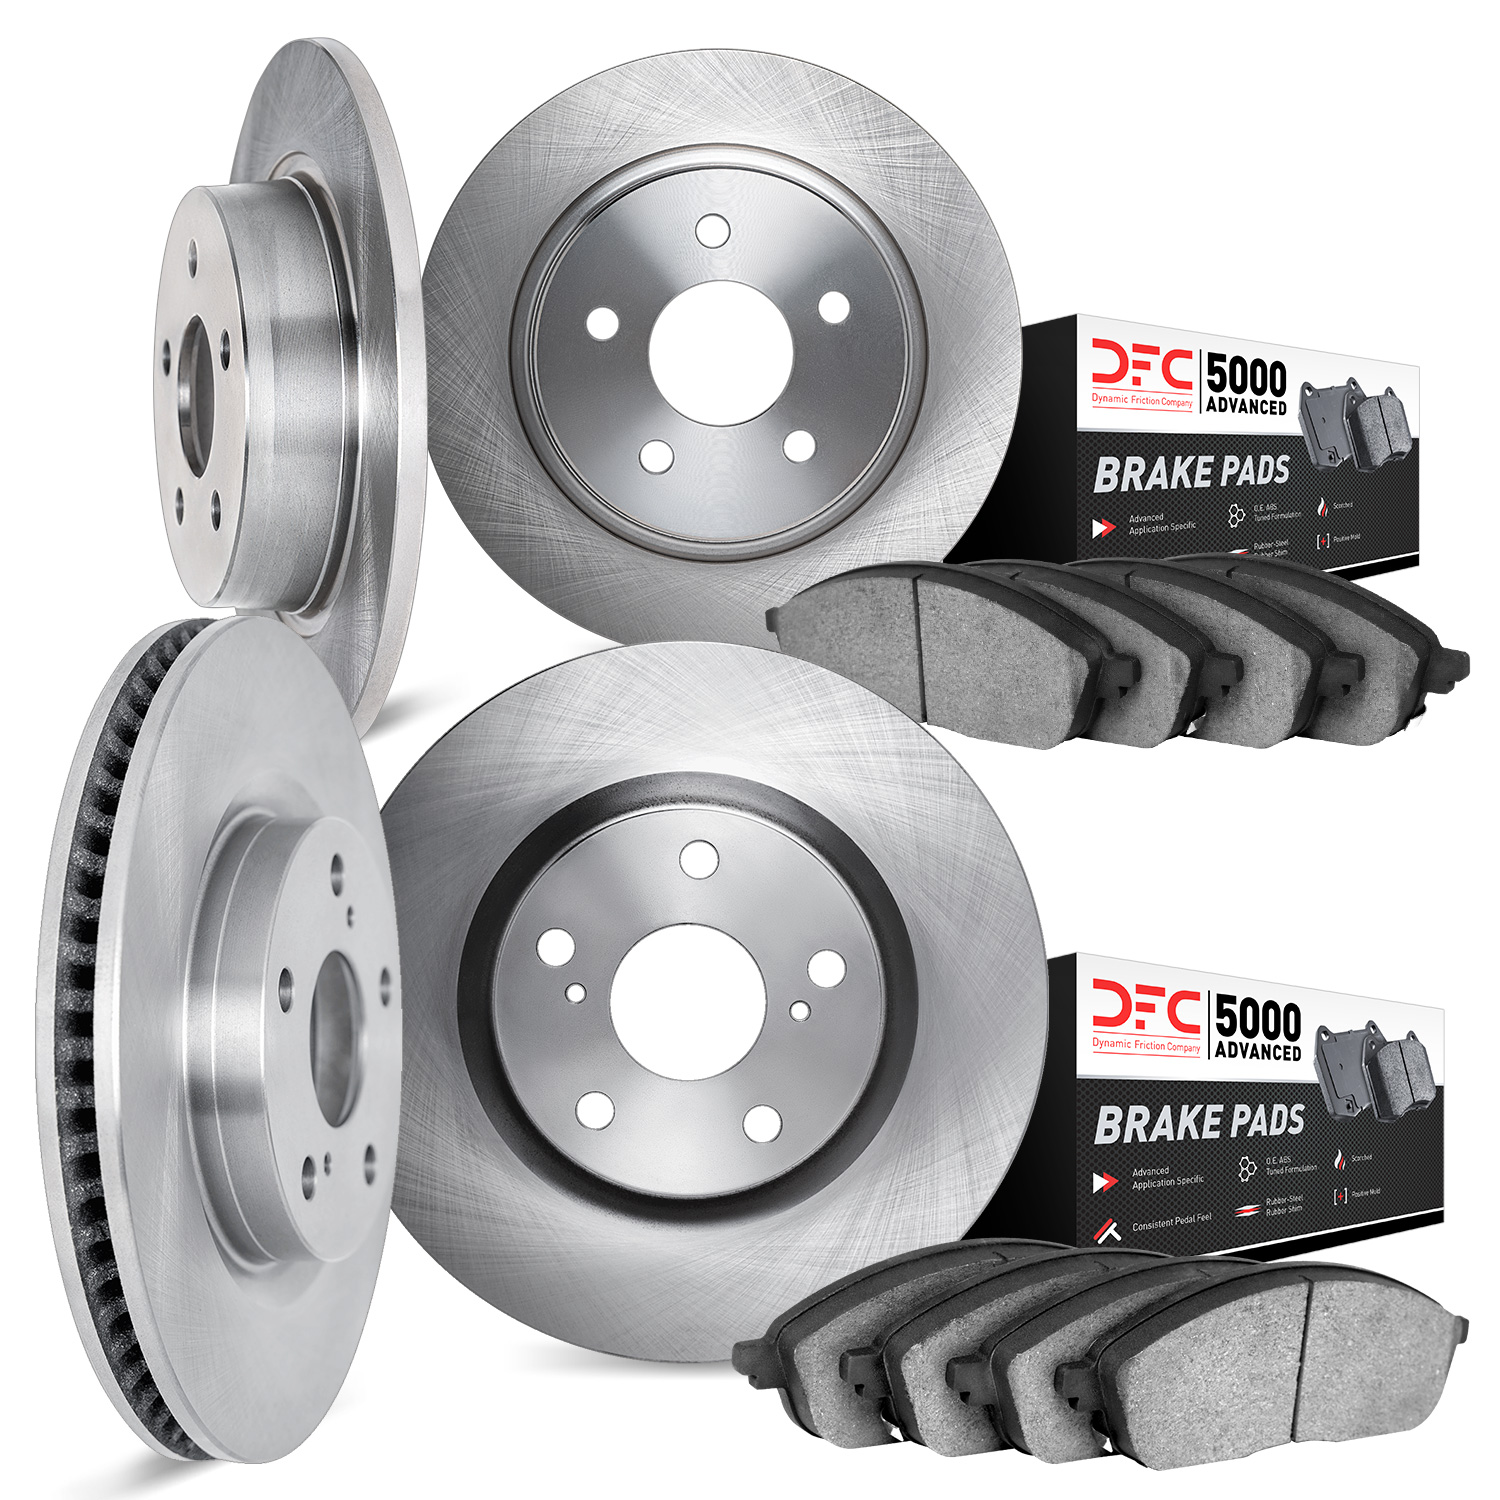 6504-80131 Brake Rotors w/5000 Advanced Brake Pads Kit, Fits Select Ford/Lincoln/Mercury/Mazda, Position: Front and Rear